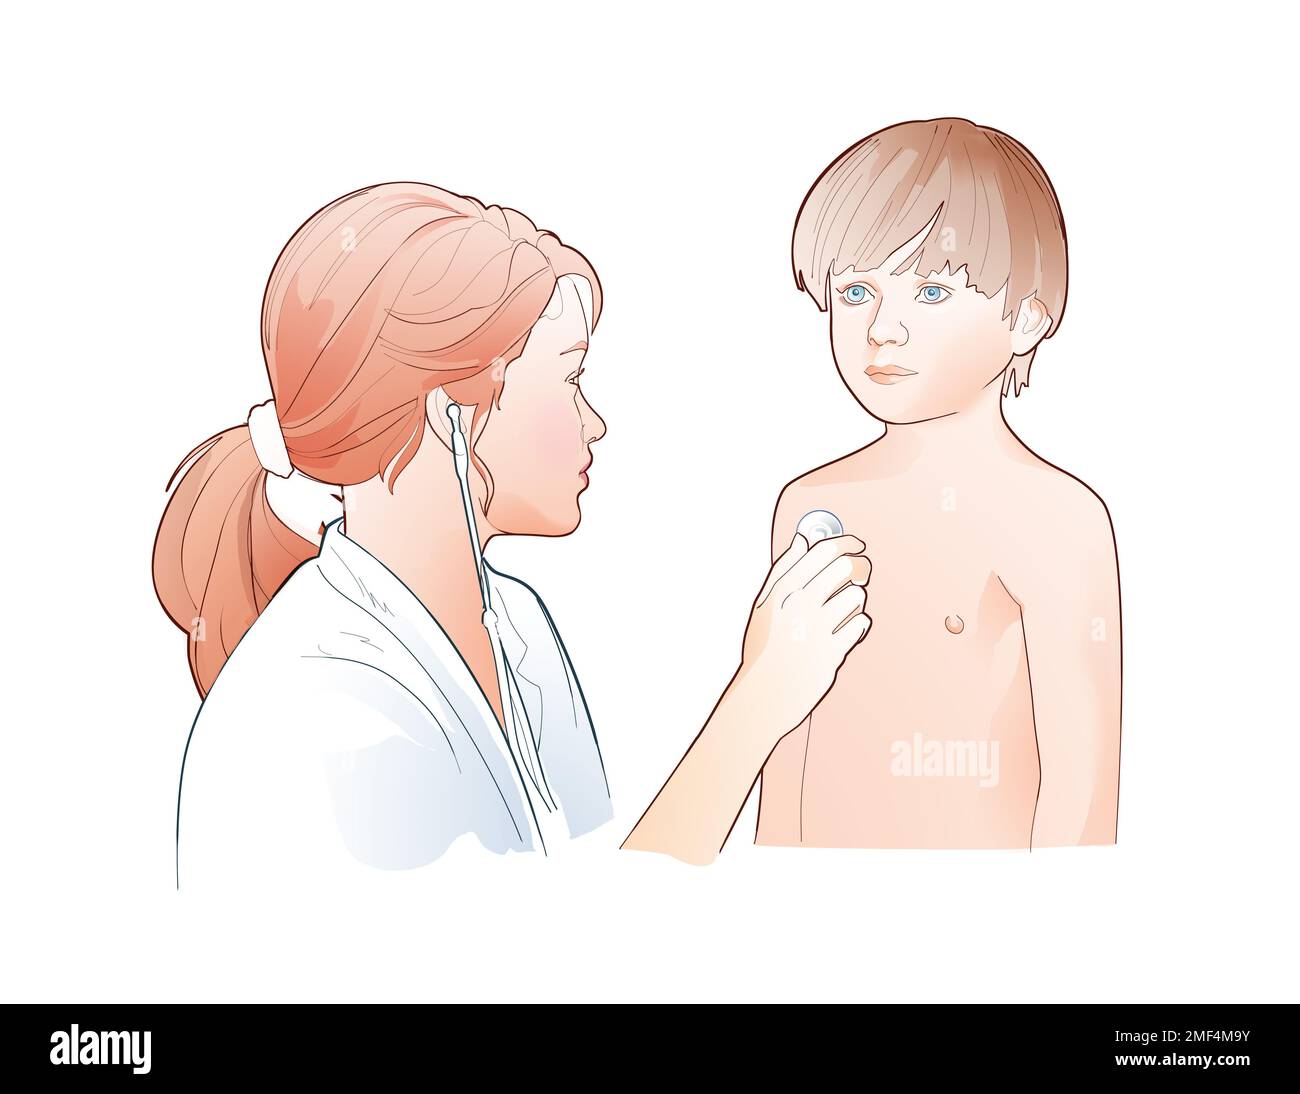 Digital illustration of a doctor or nurse and a sick child. He listened to him with a stethoscope in the doctor's office. Stock Photo